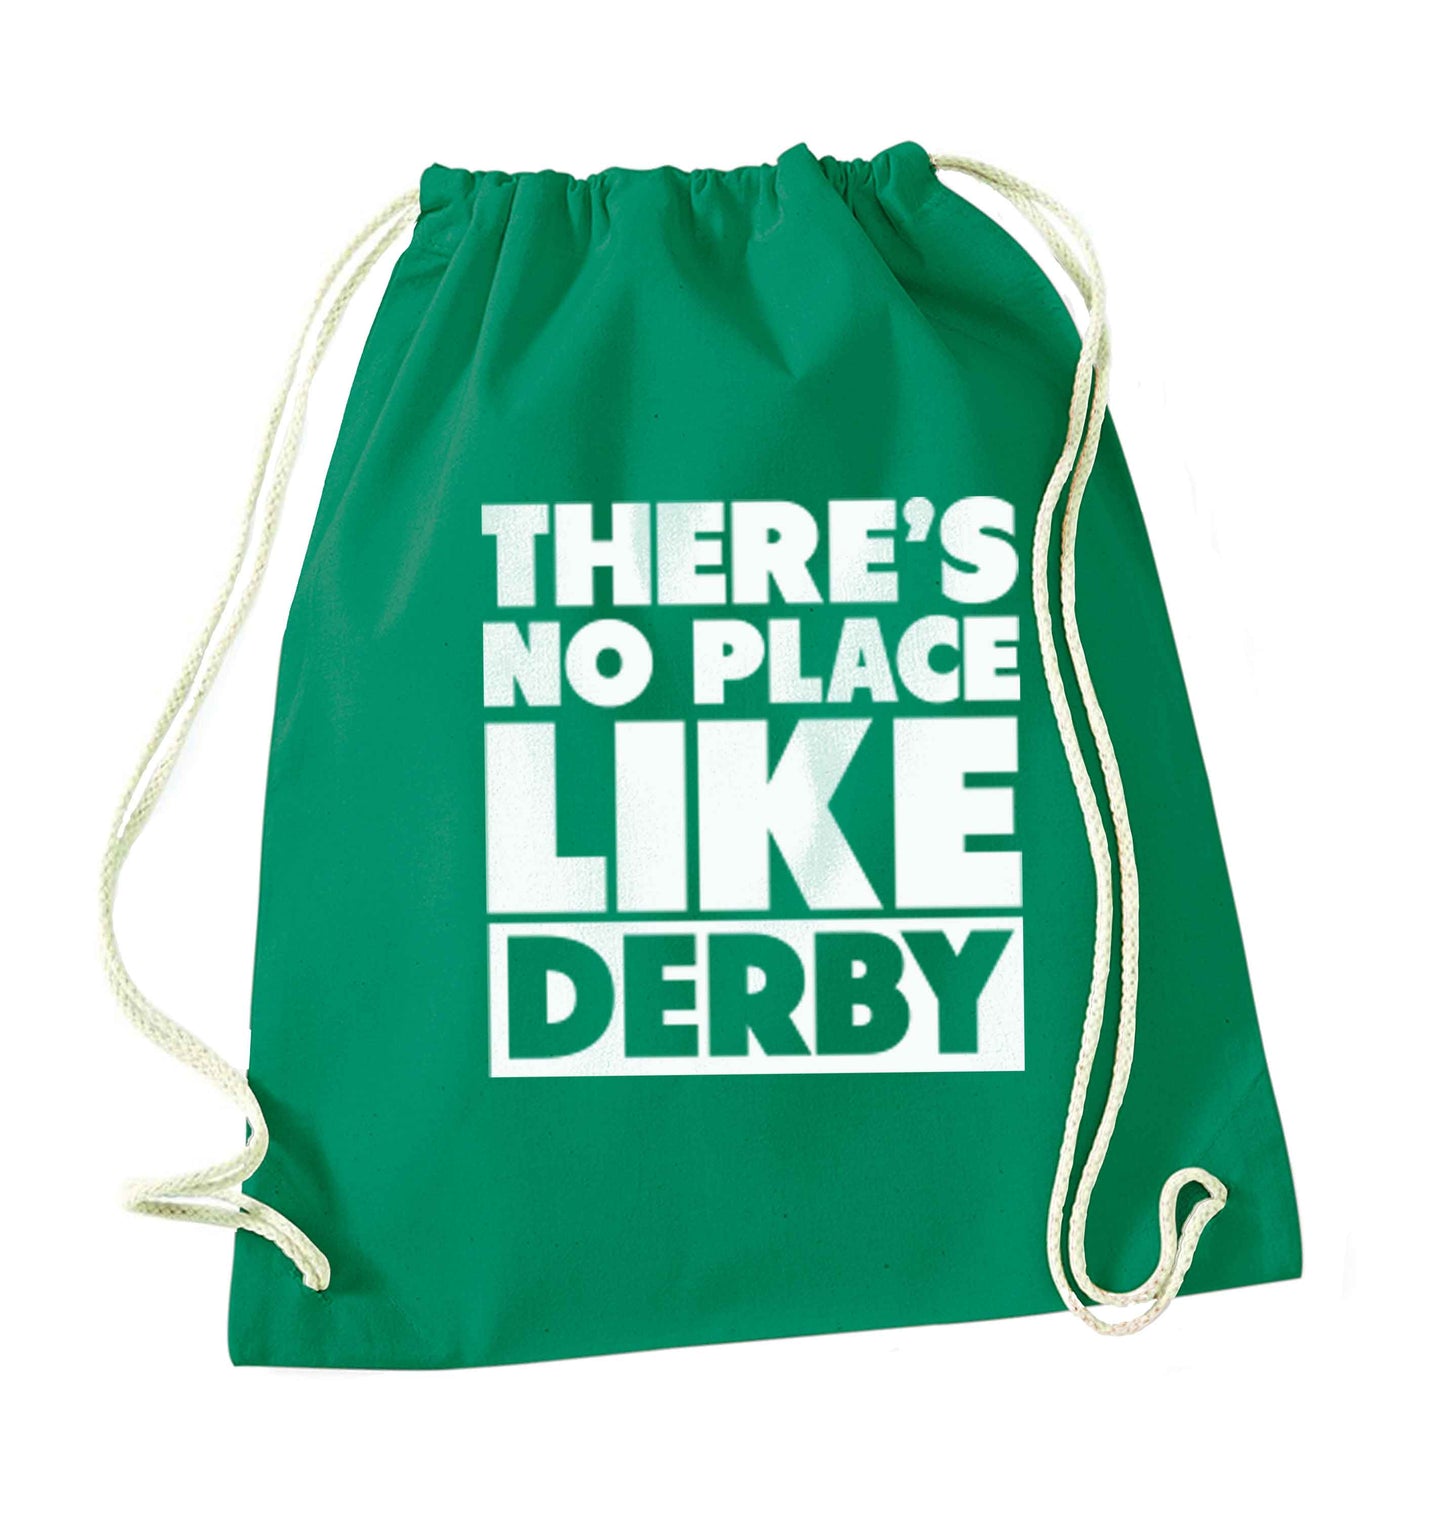 There's no place like Derby green drawstring bag